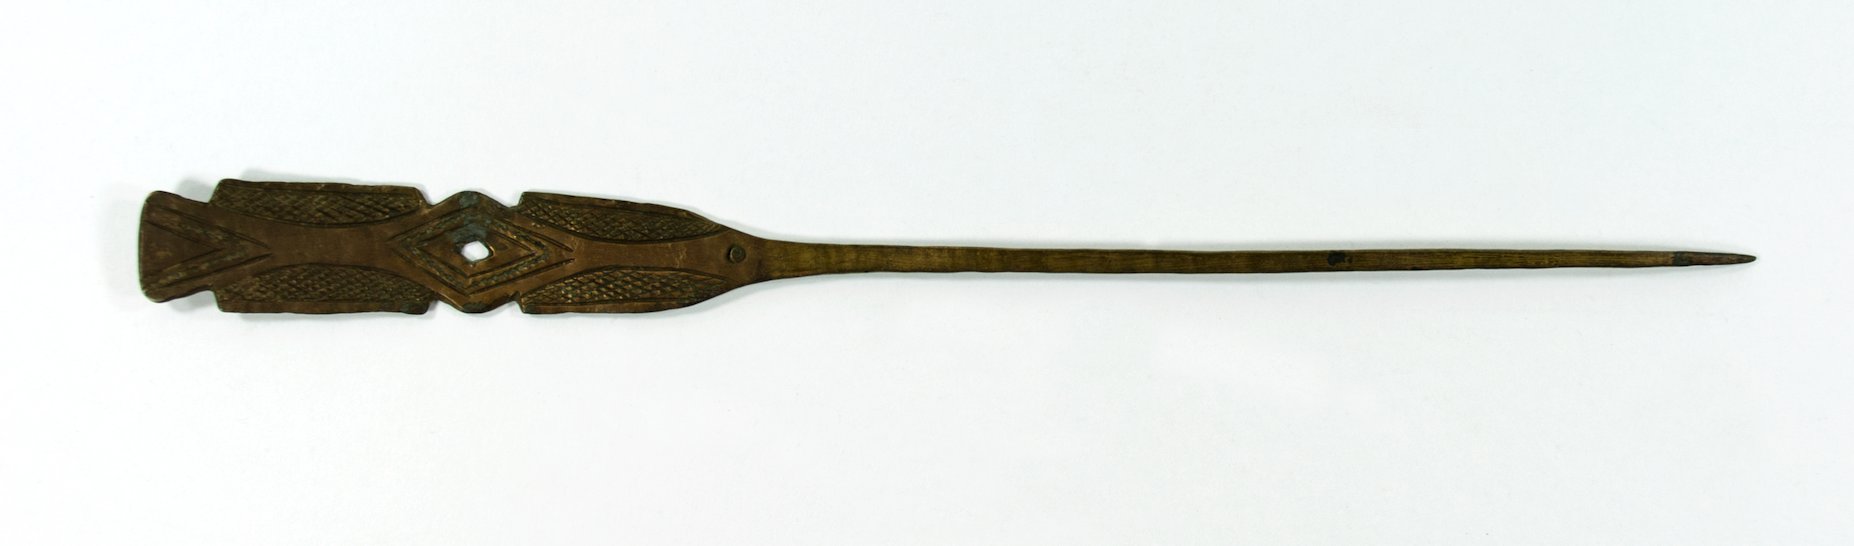  A flat brass hairpin. Decorated with crosshatchings and lines. There is a diamond shape in the middle with dots beaten into it.